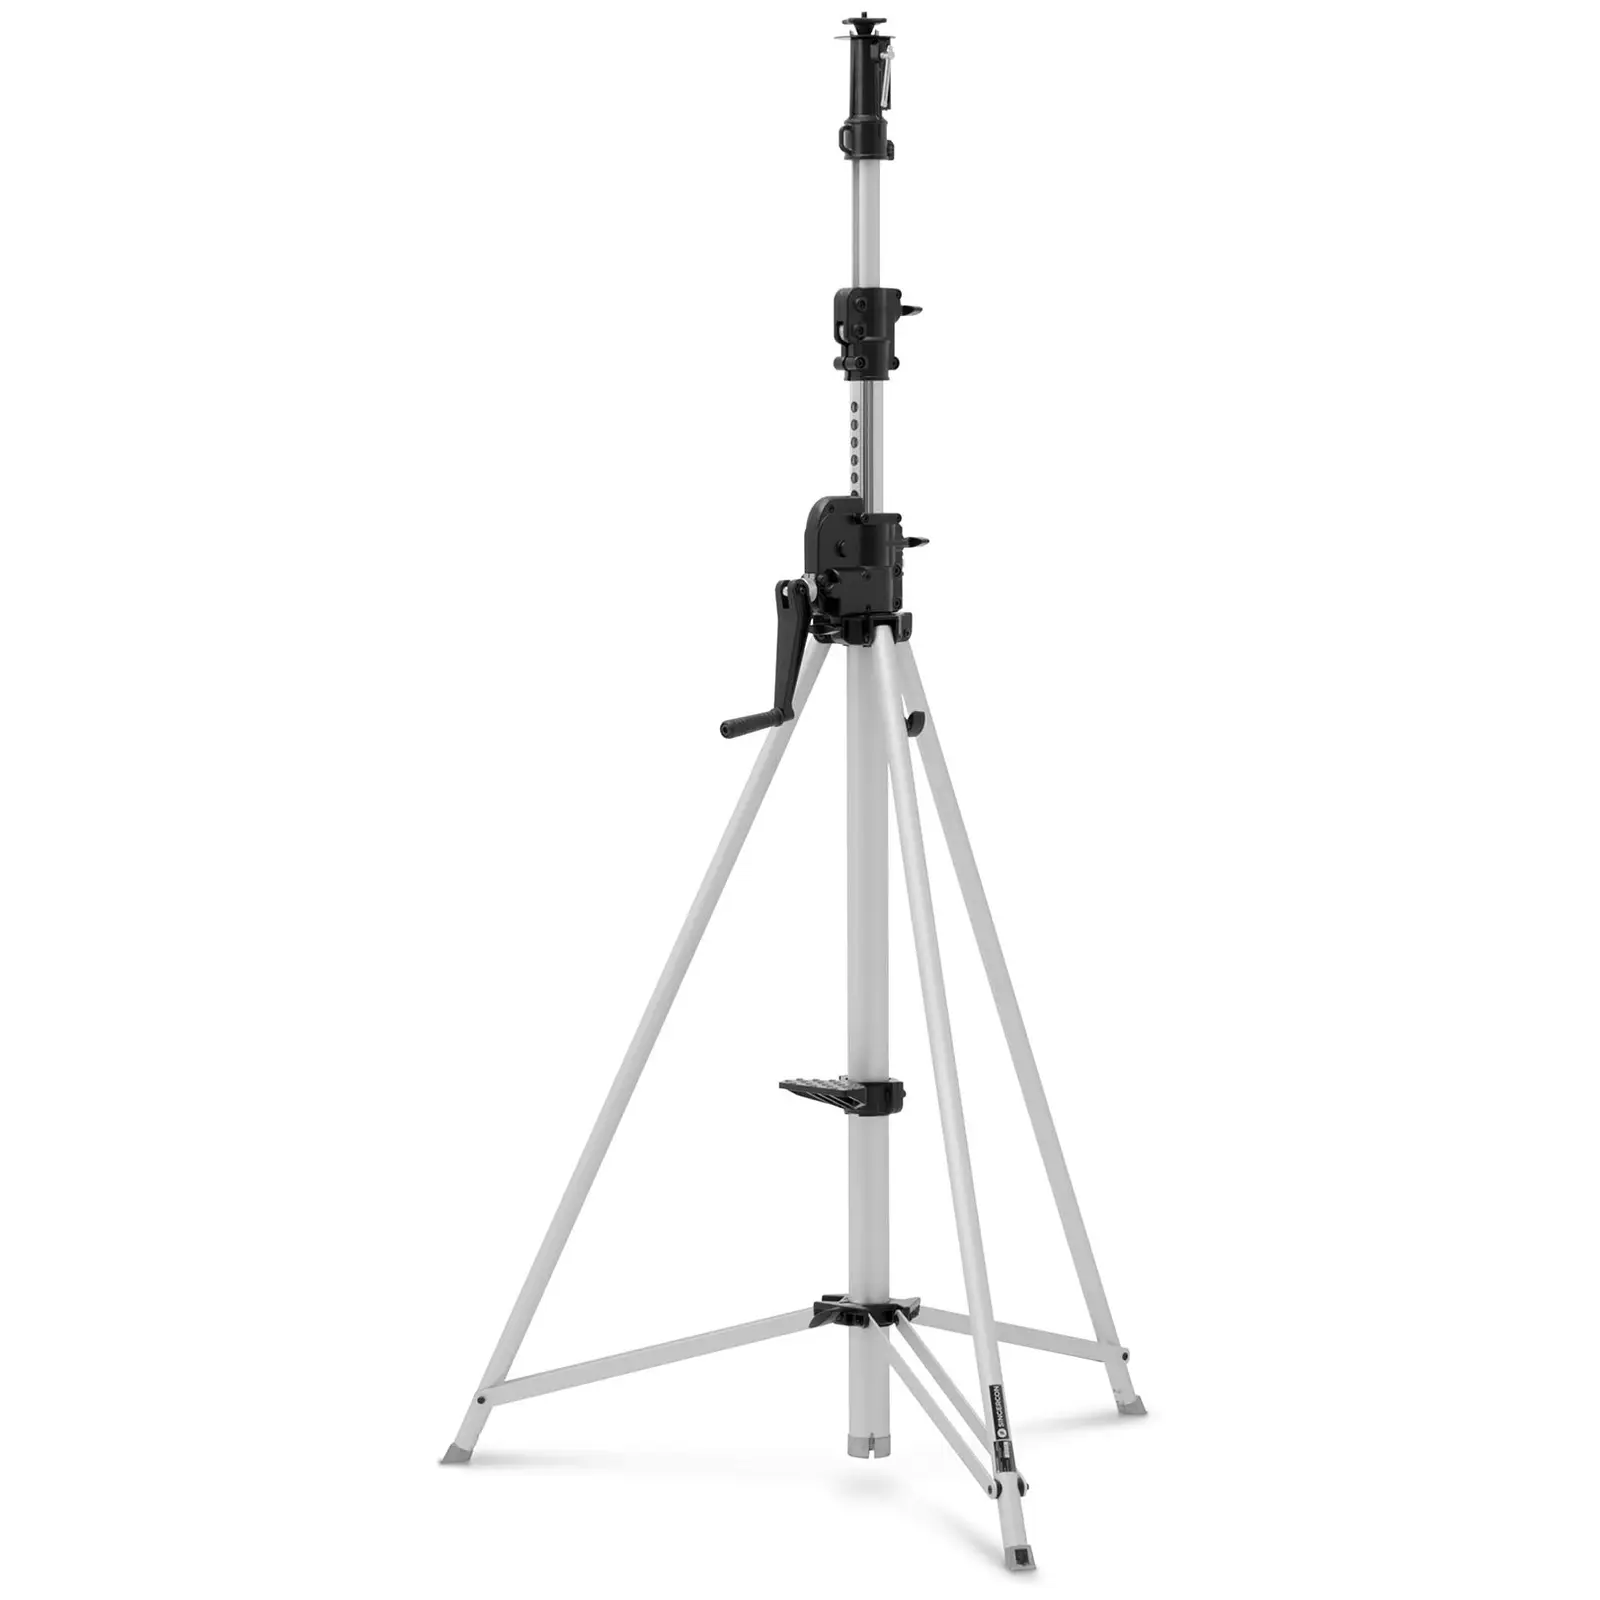 Light Stand - up to 50 kg - 1.67 - 3.7 m